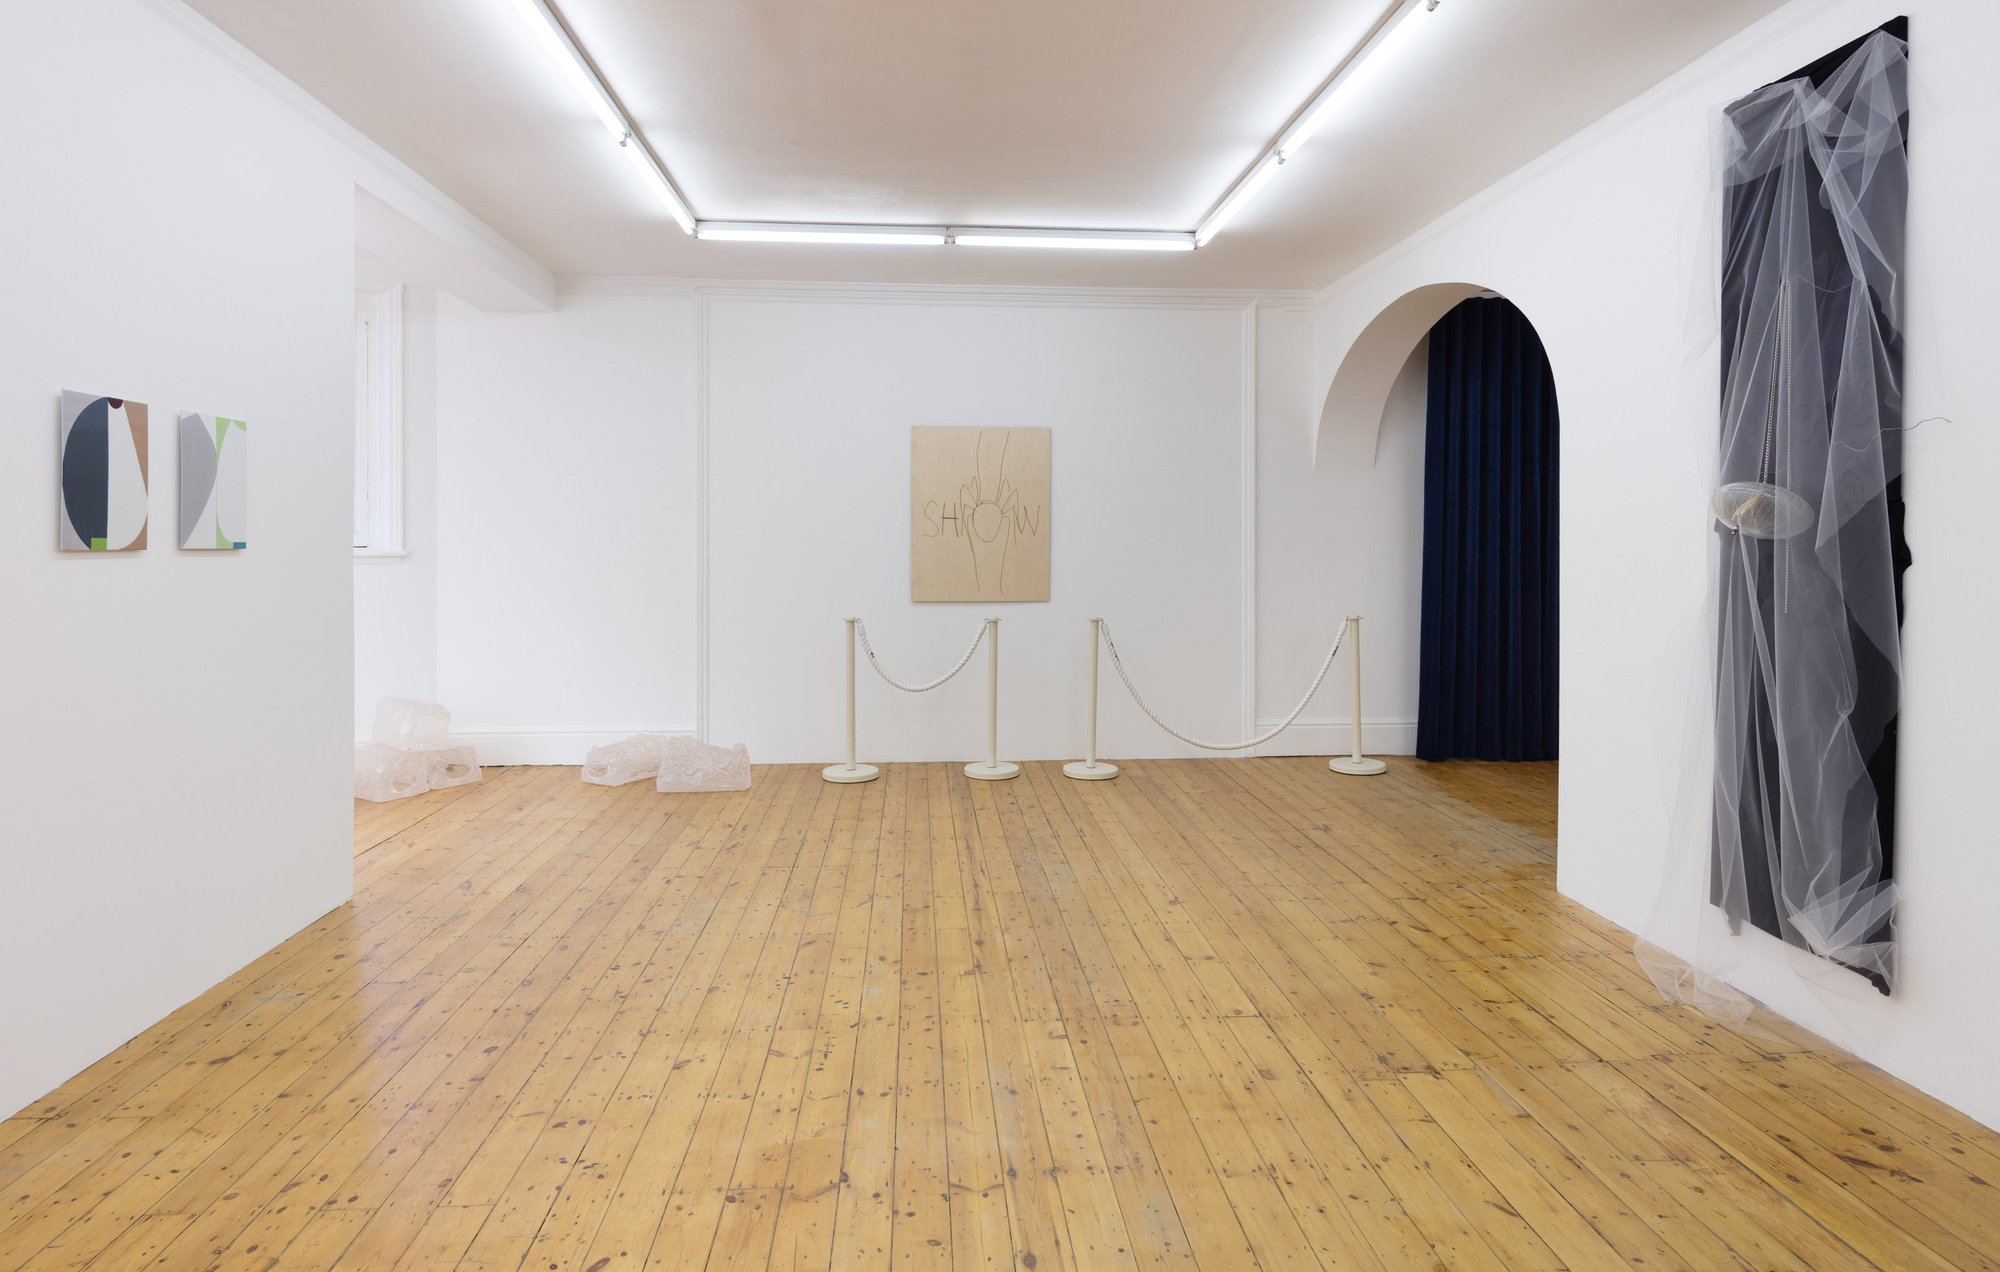 Installation view, WE, Rodeo, London, 2018.